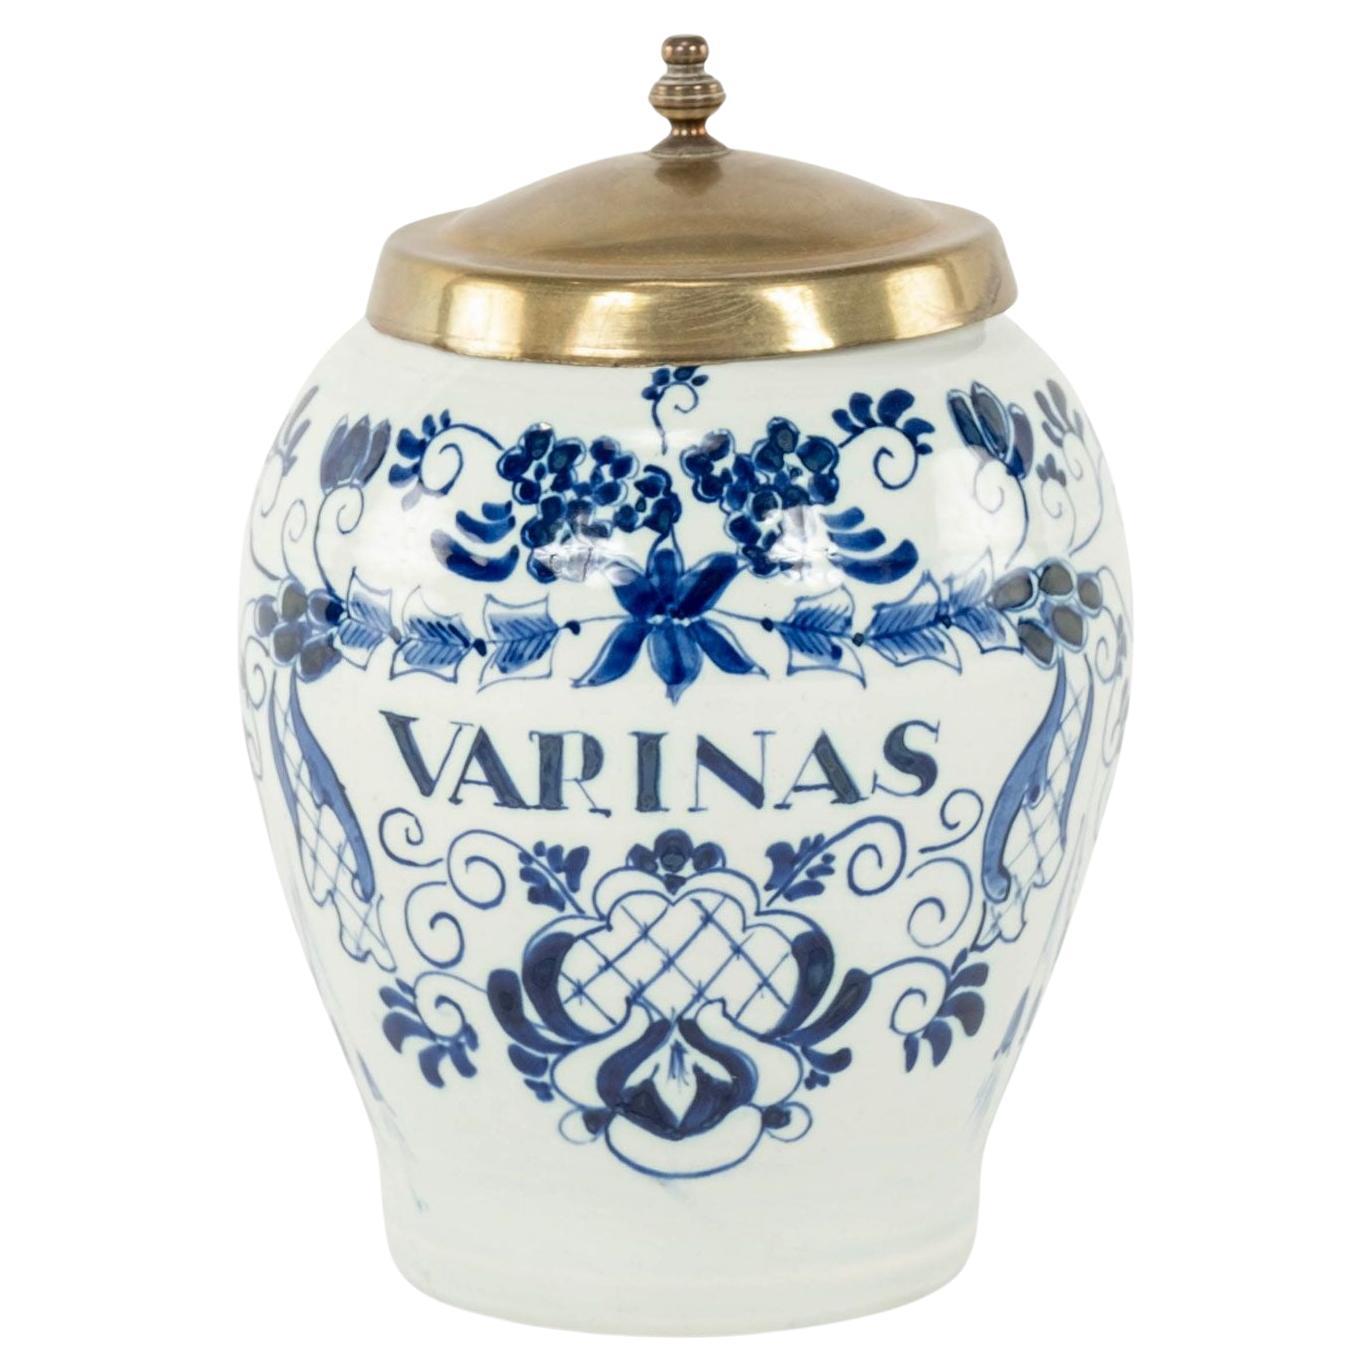 Delft Blue and White "Varinas" Tobacco Jar For Sale